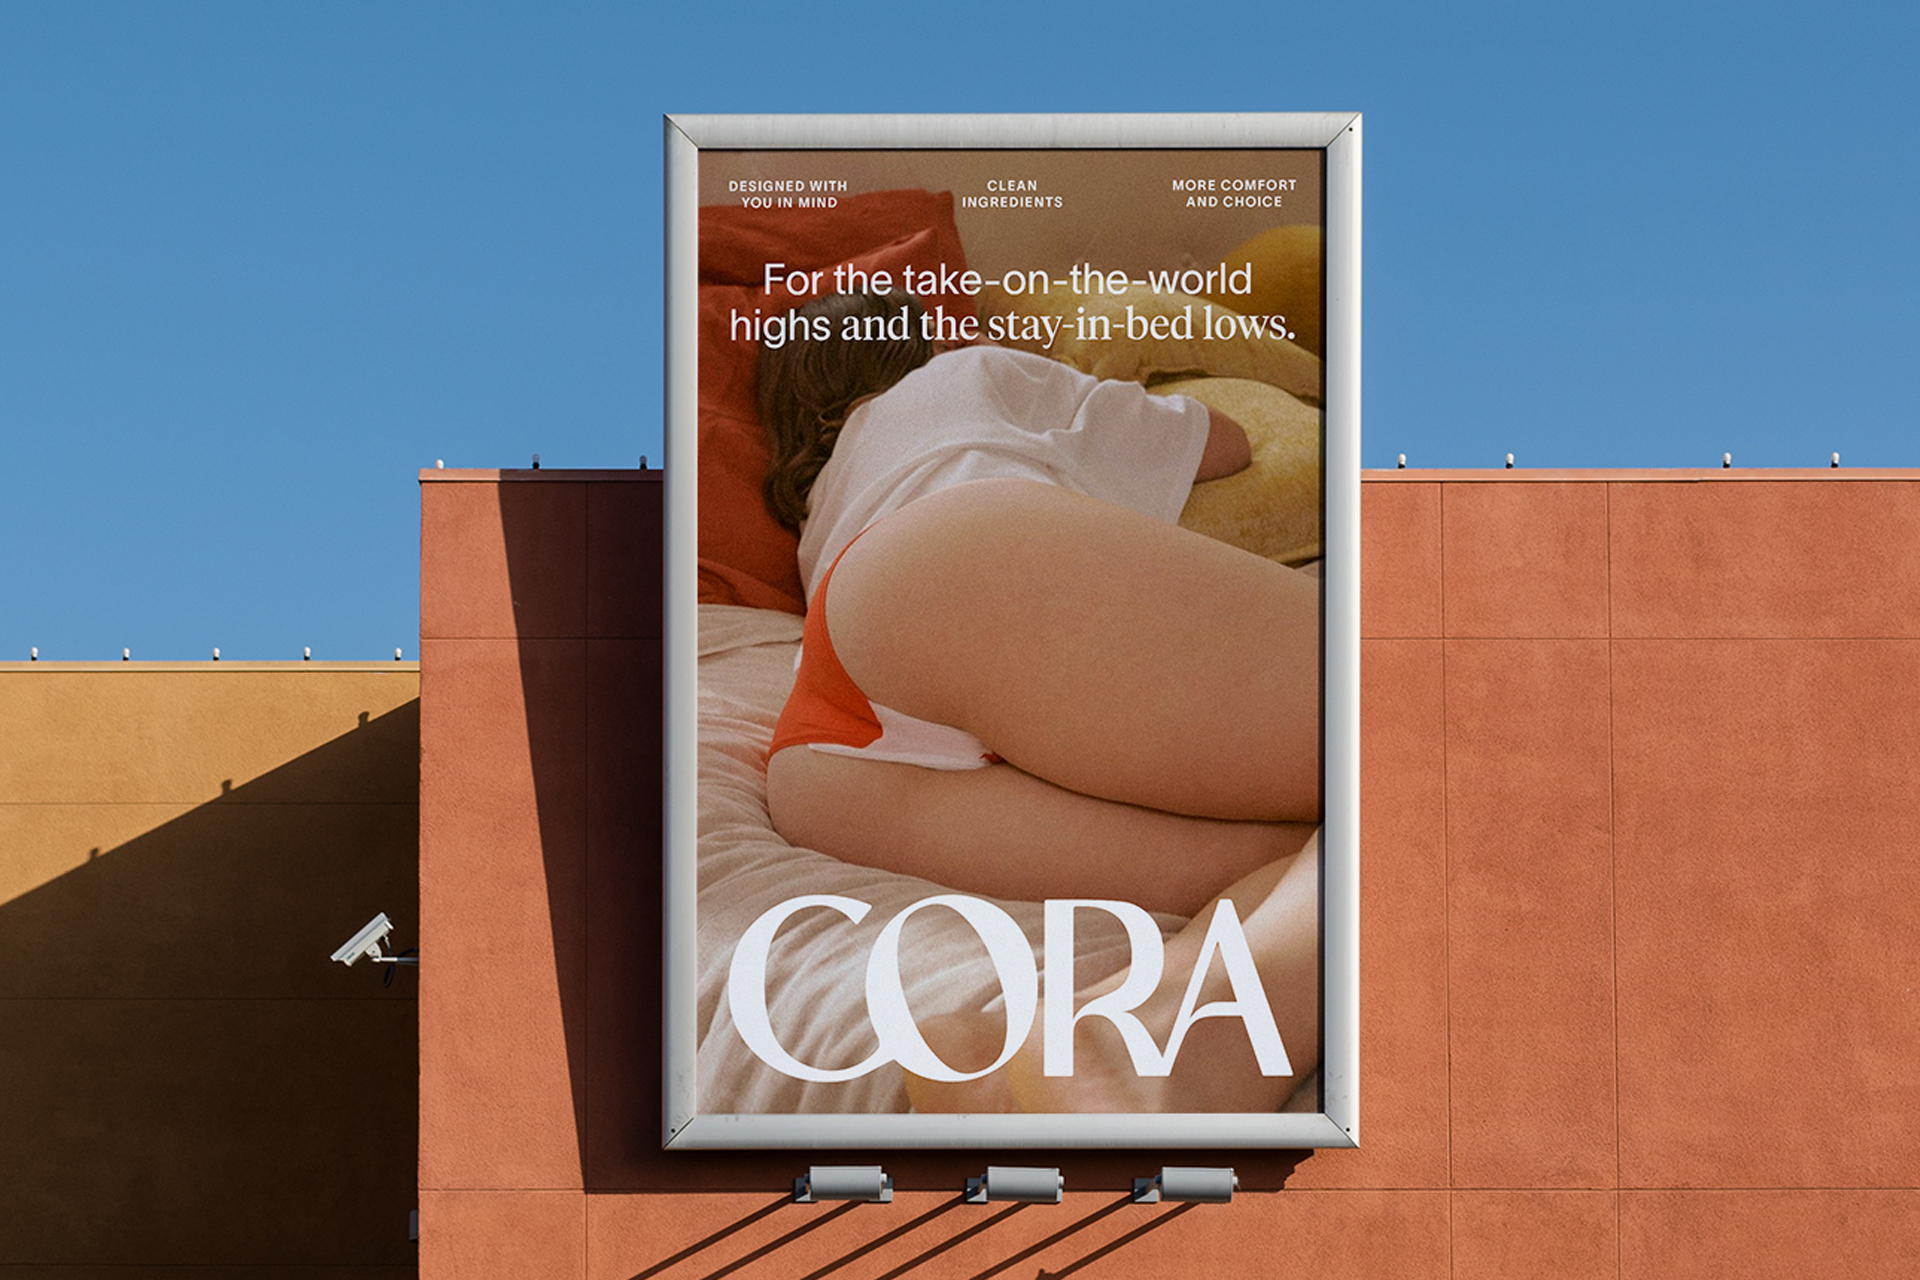 Wellness And Period Care Brand Cora Launches New Inclusive Identity Created  By Mother Design